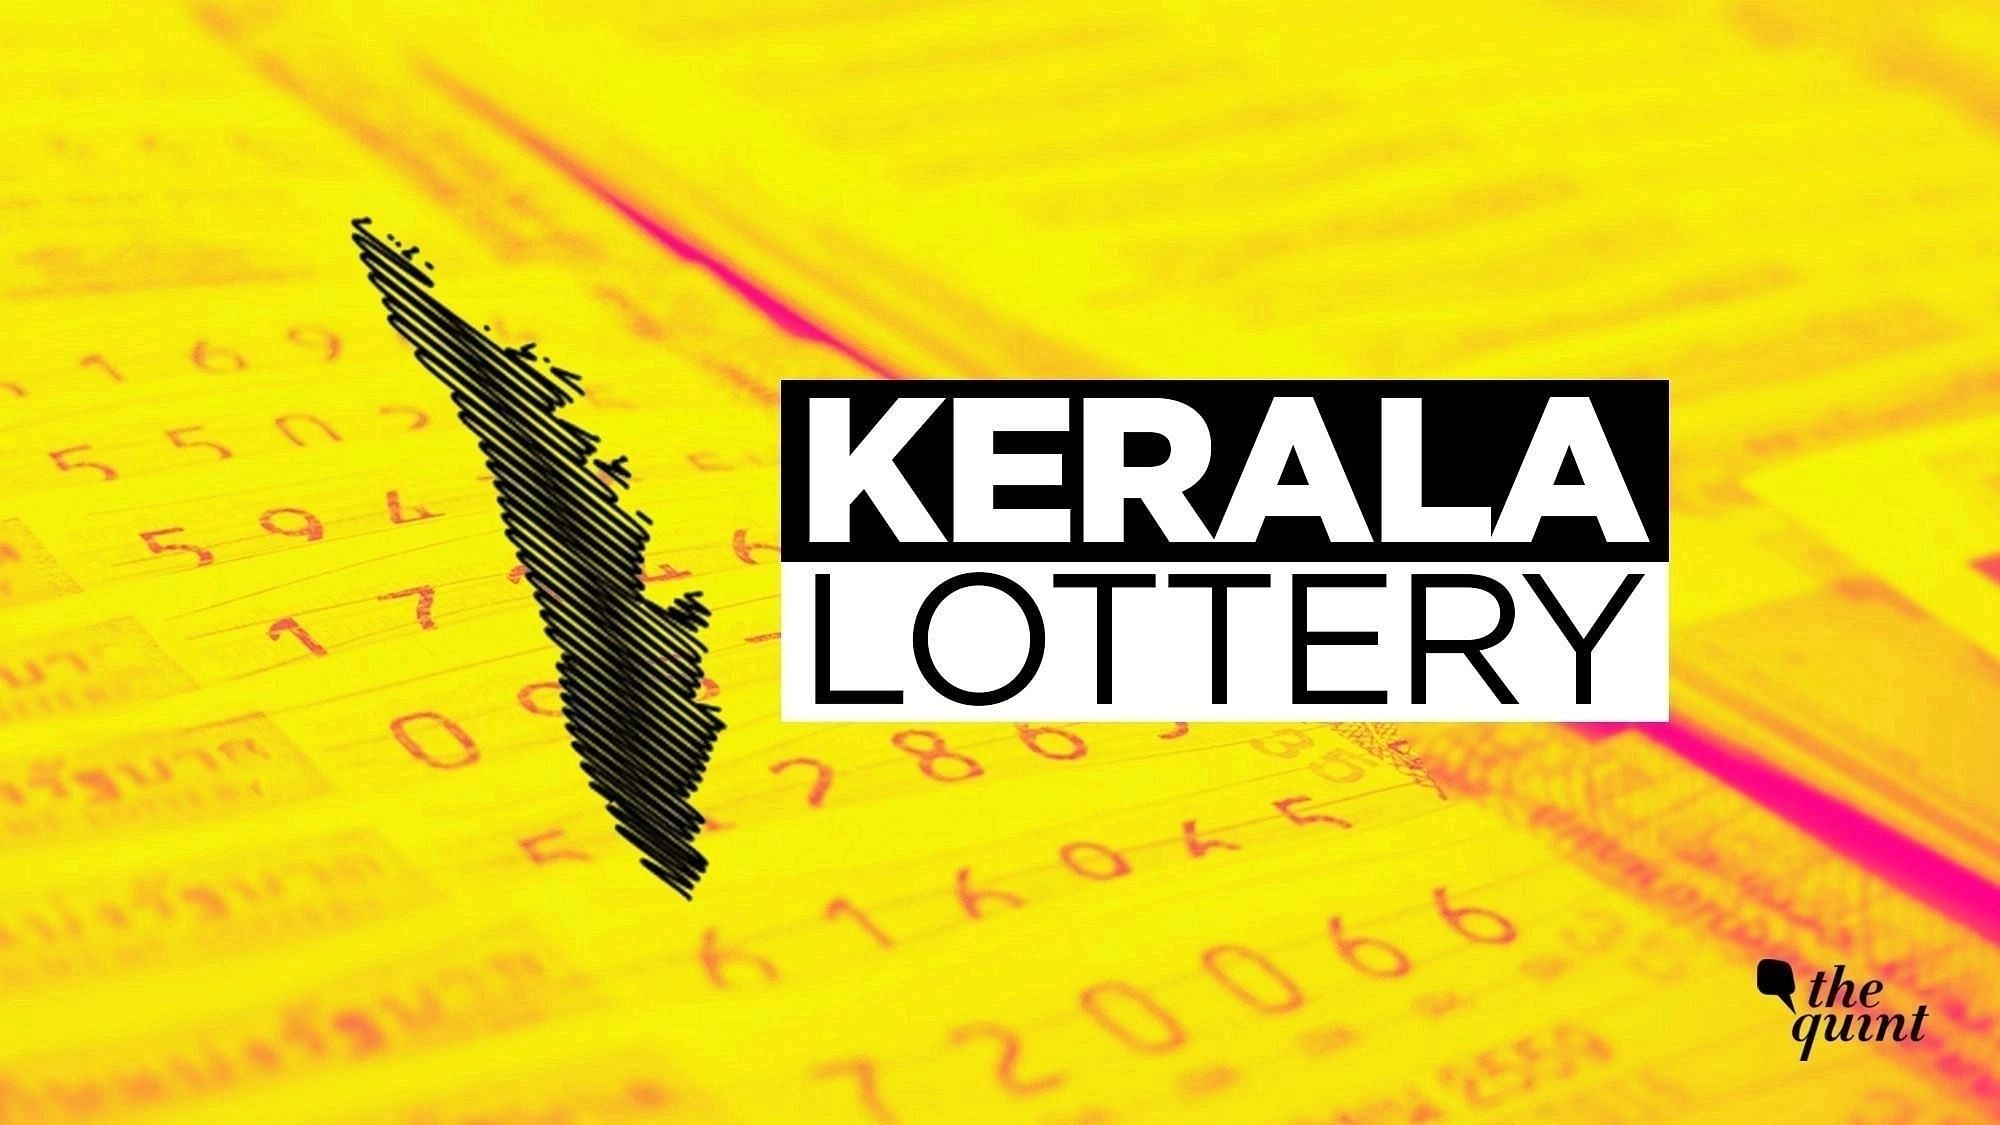 <div class="paragraphs"><p>The Kerala Lottery&nbsp;Akshaya AK 575 prize money for Wednesday is mentioned here.</p></div>